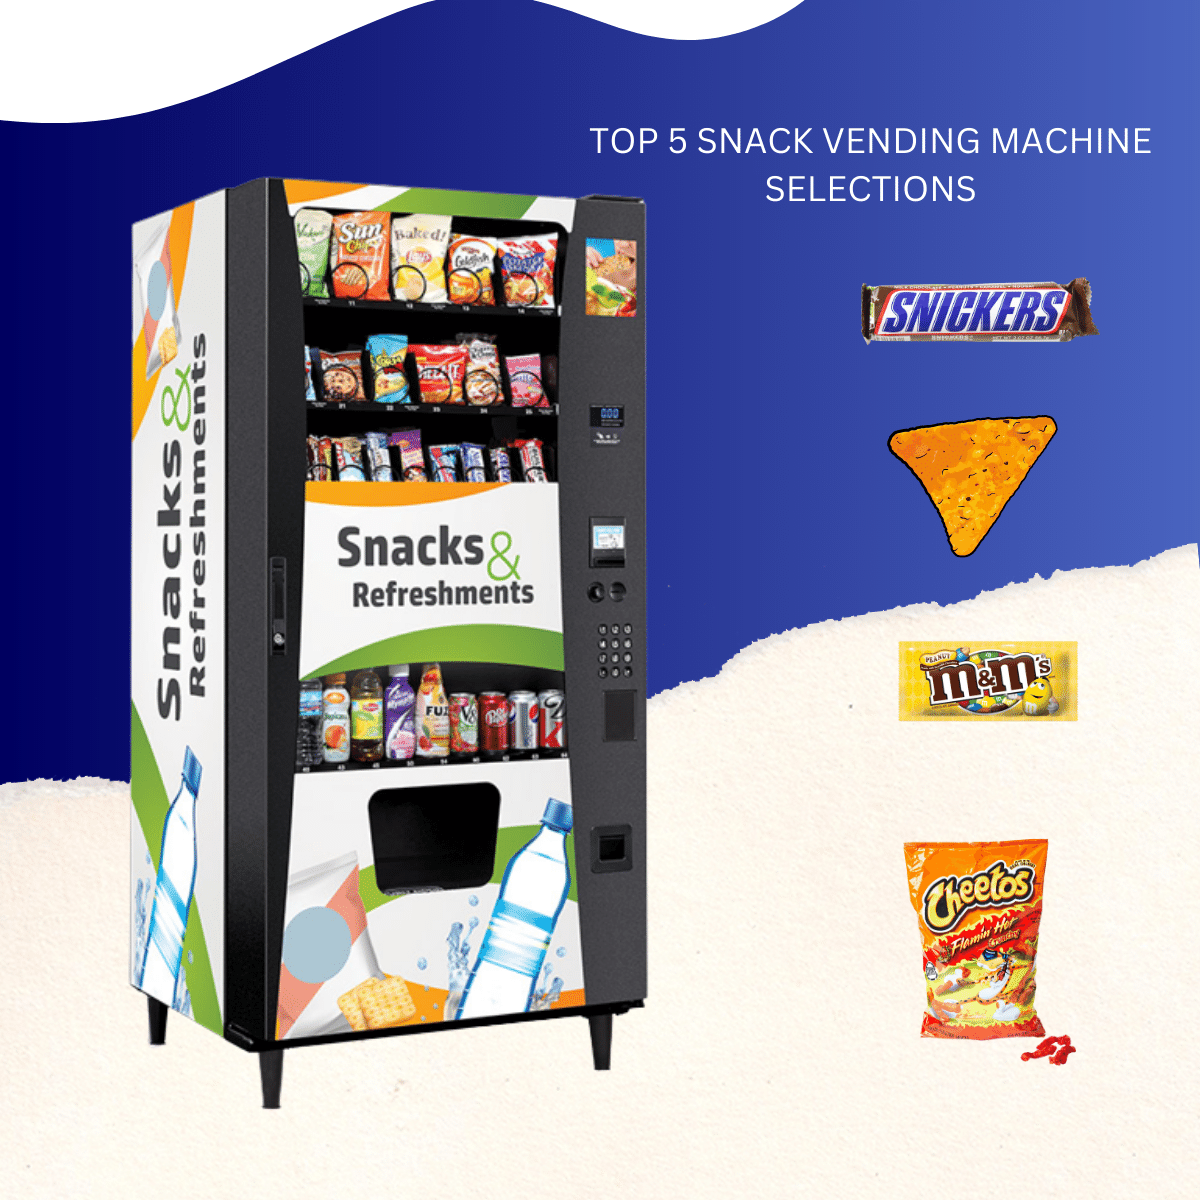 TOP 5 SNACK VENDING MACHINE SELECTIONS